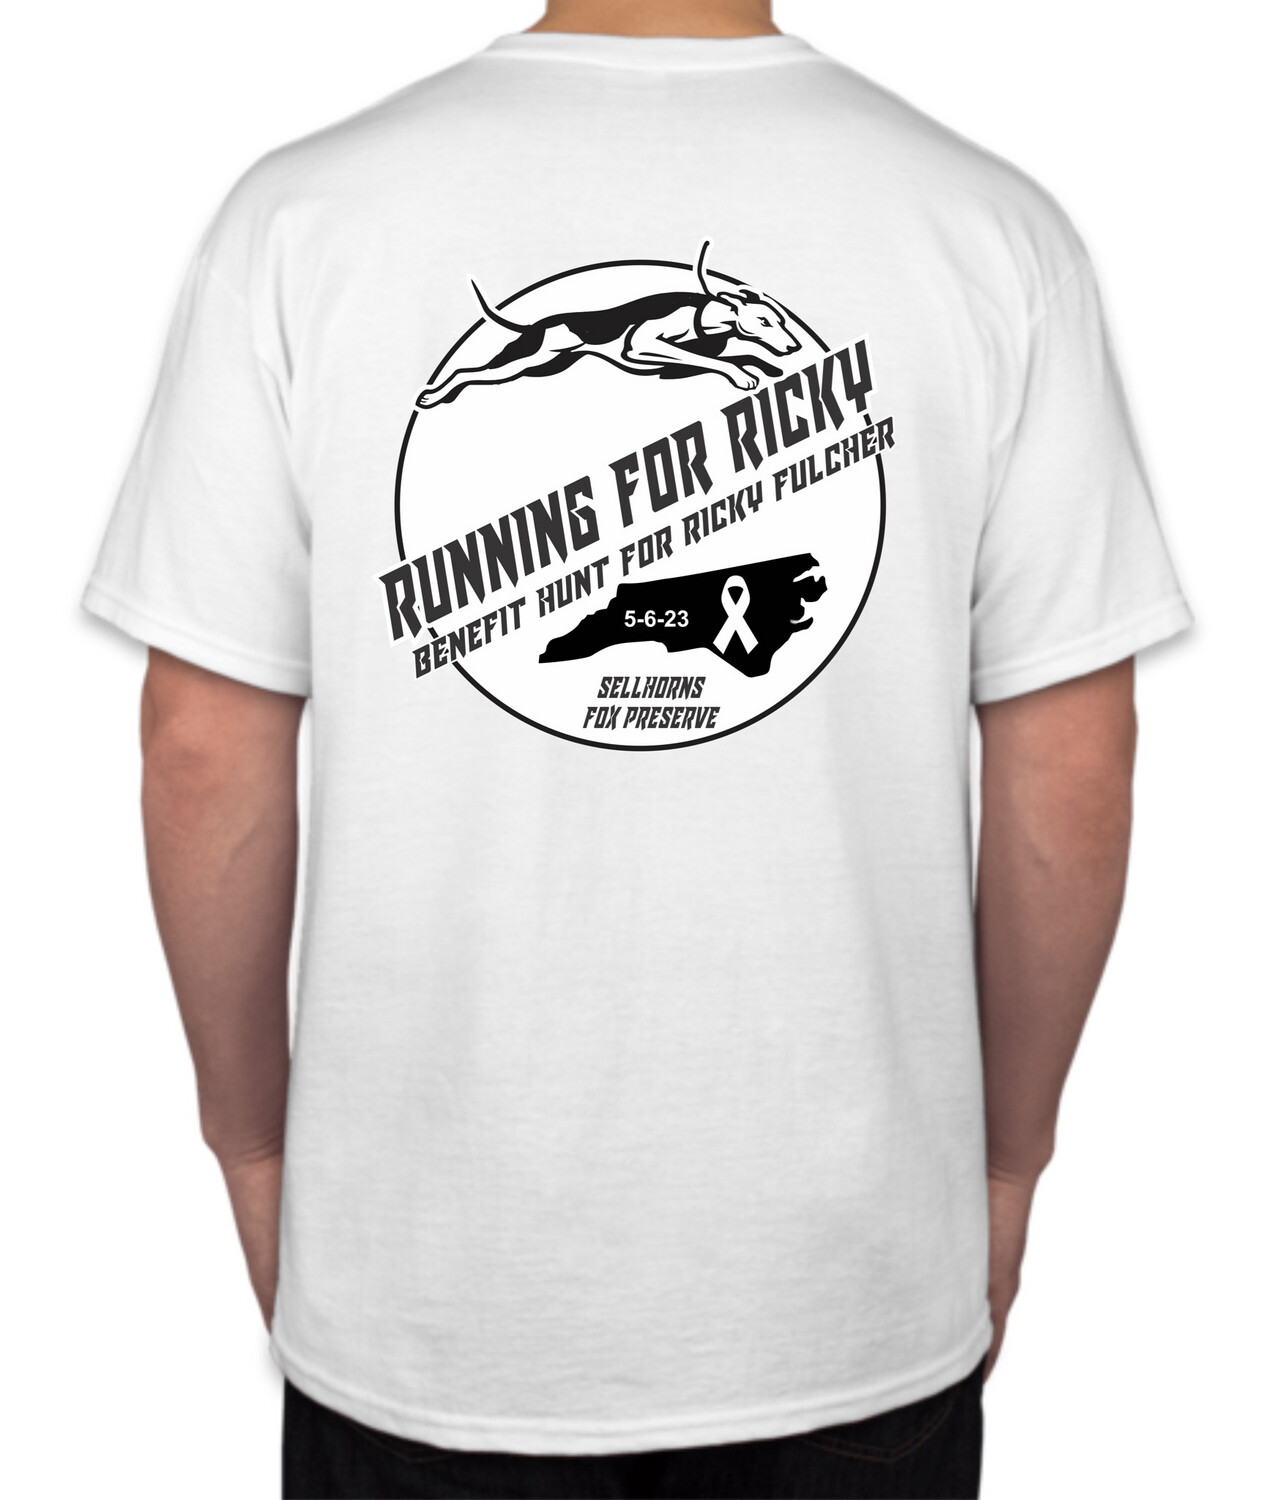 “Running for Ricky” Short Sleeve Cotton T-Shirt - Youth and Adult Sizes